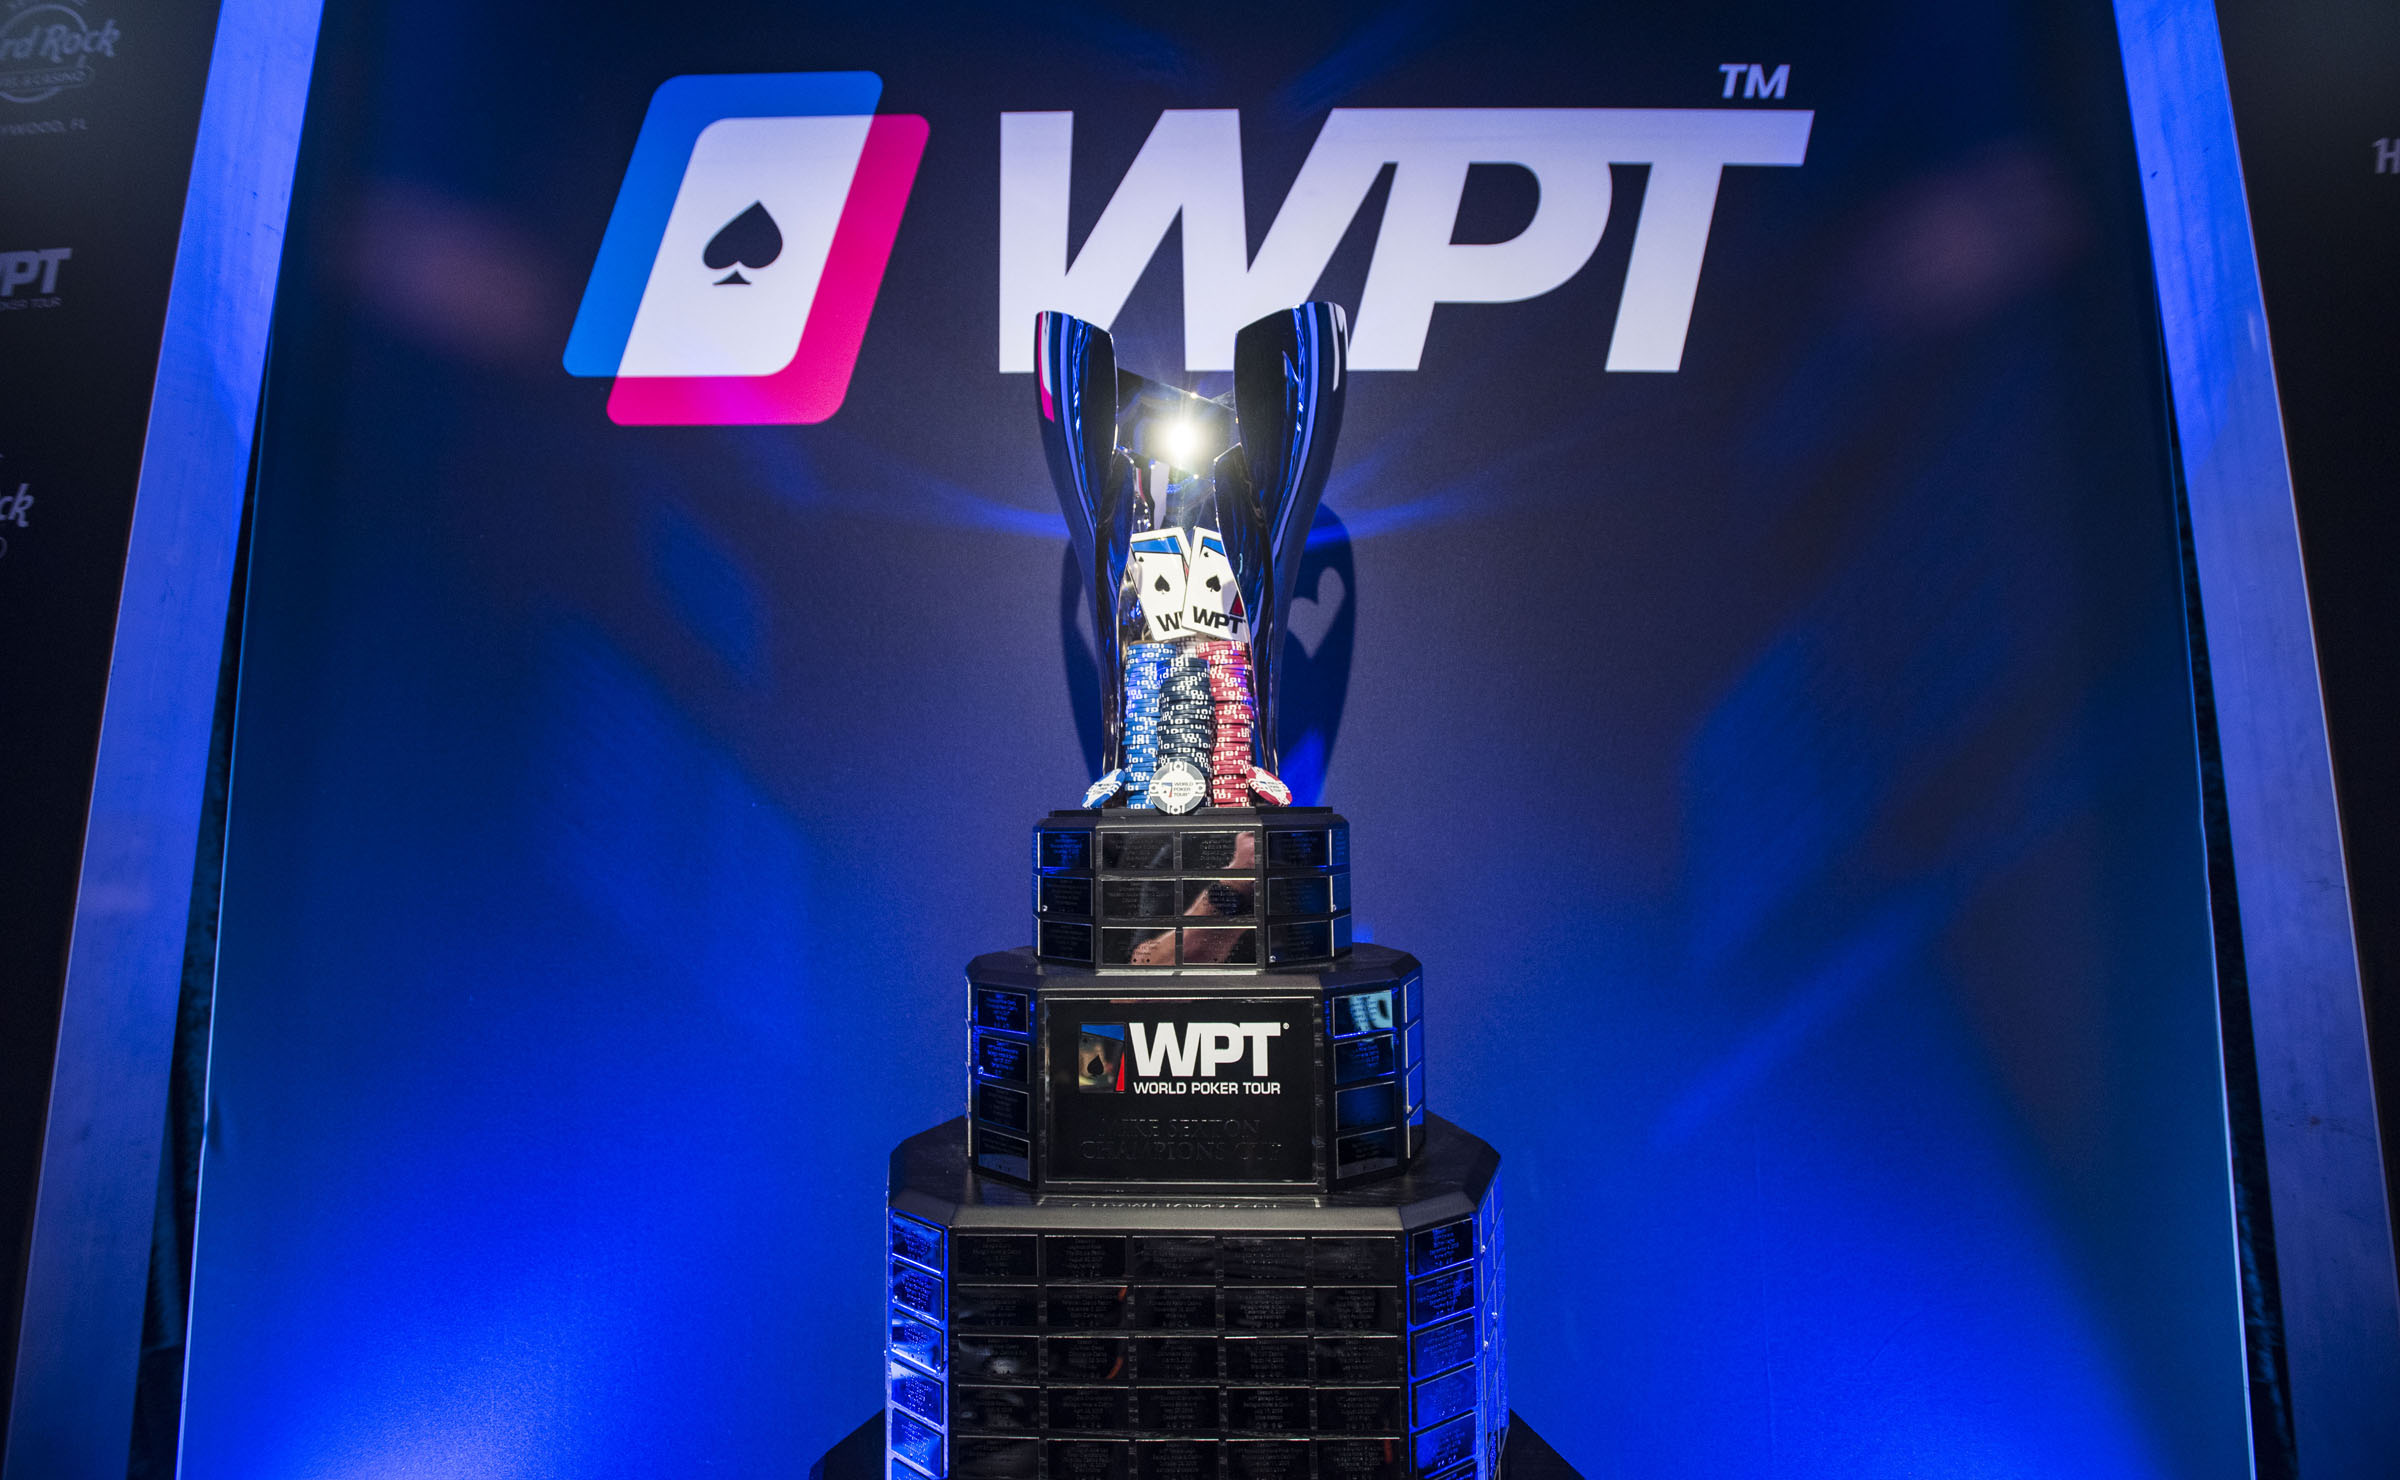 Mike Sexton WPT Champions Cup